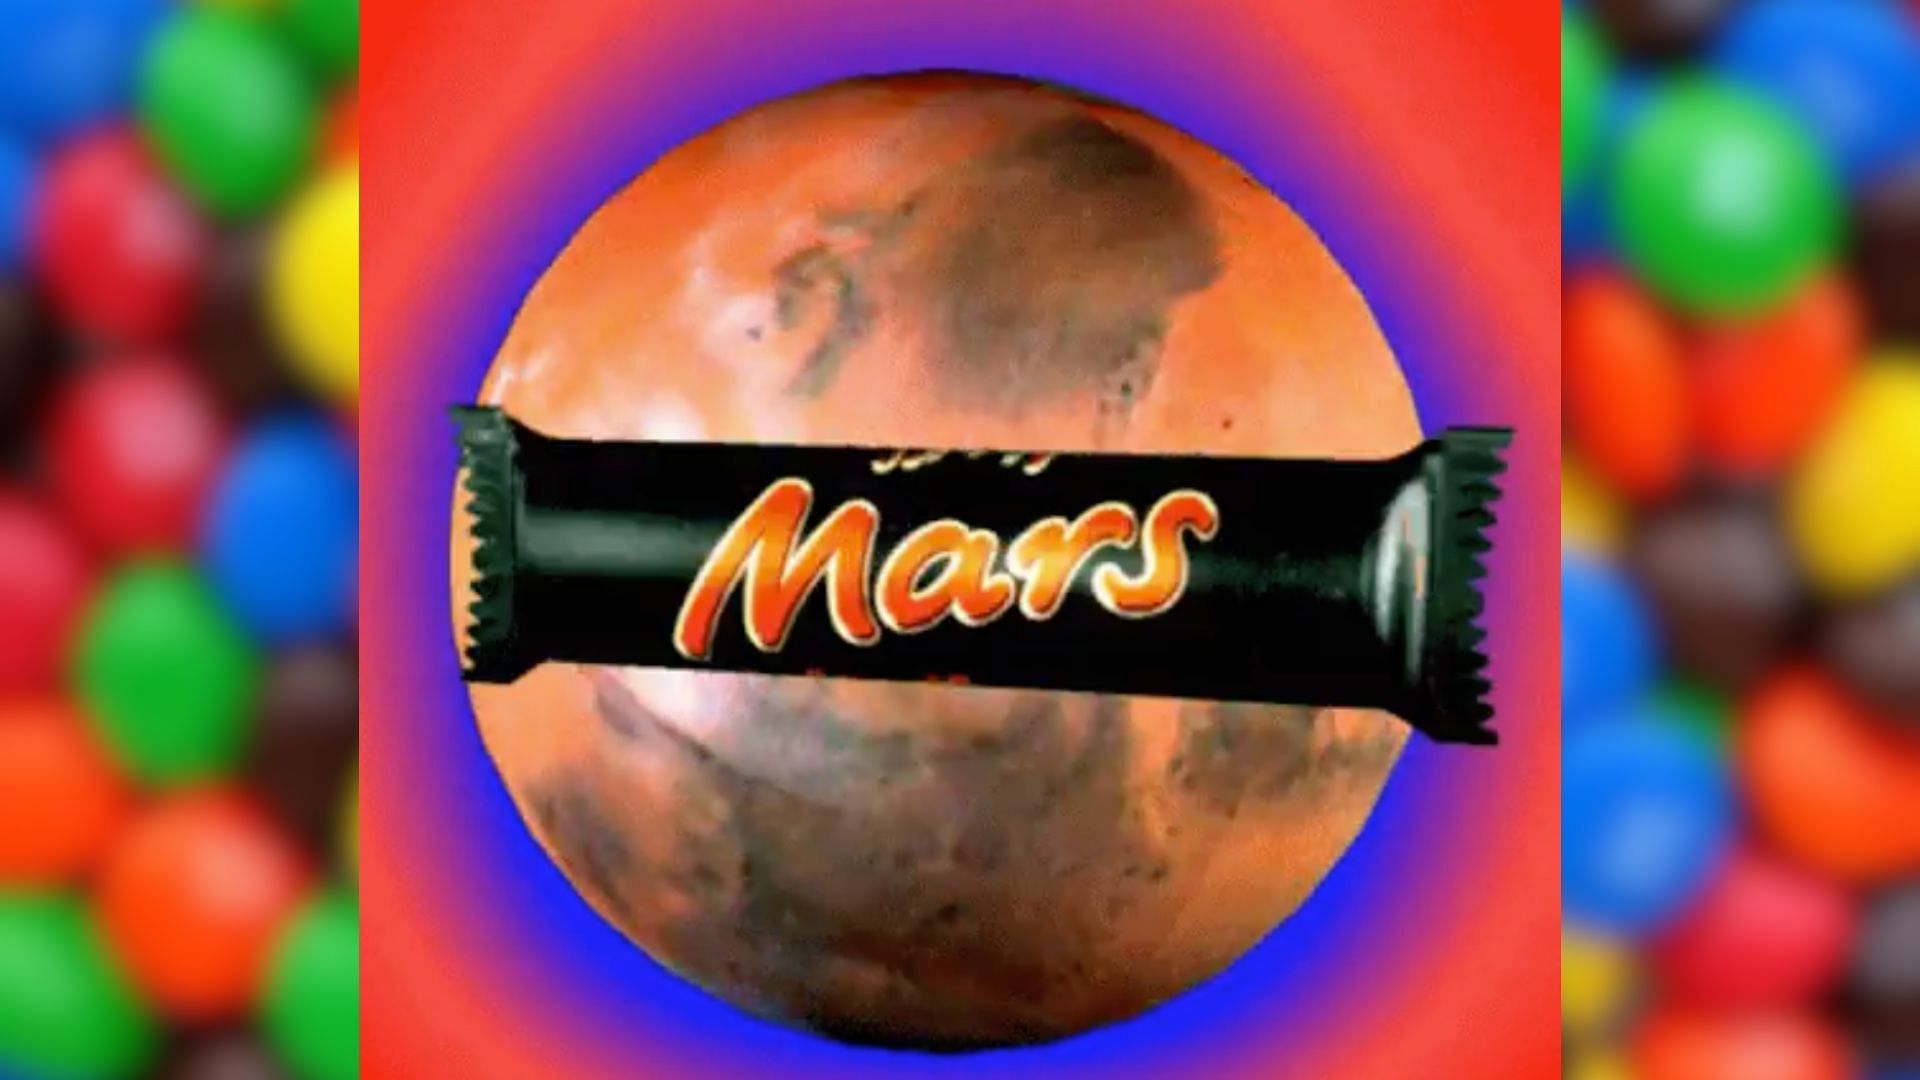 Mars chocolate child labor controversy explained (Image via snip from YouTube/@WorldWondersNow)